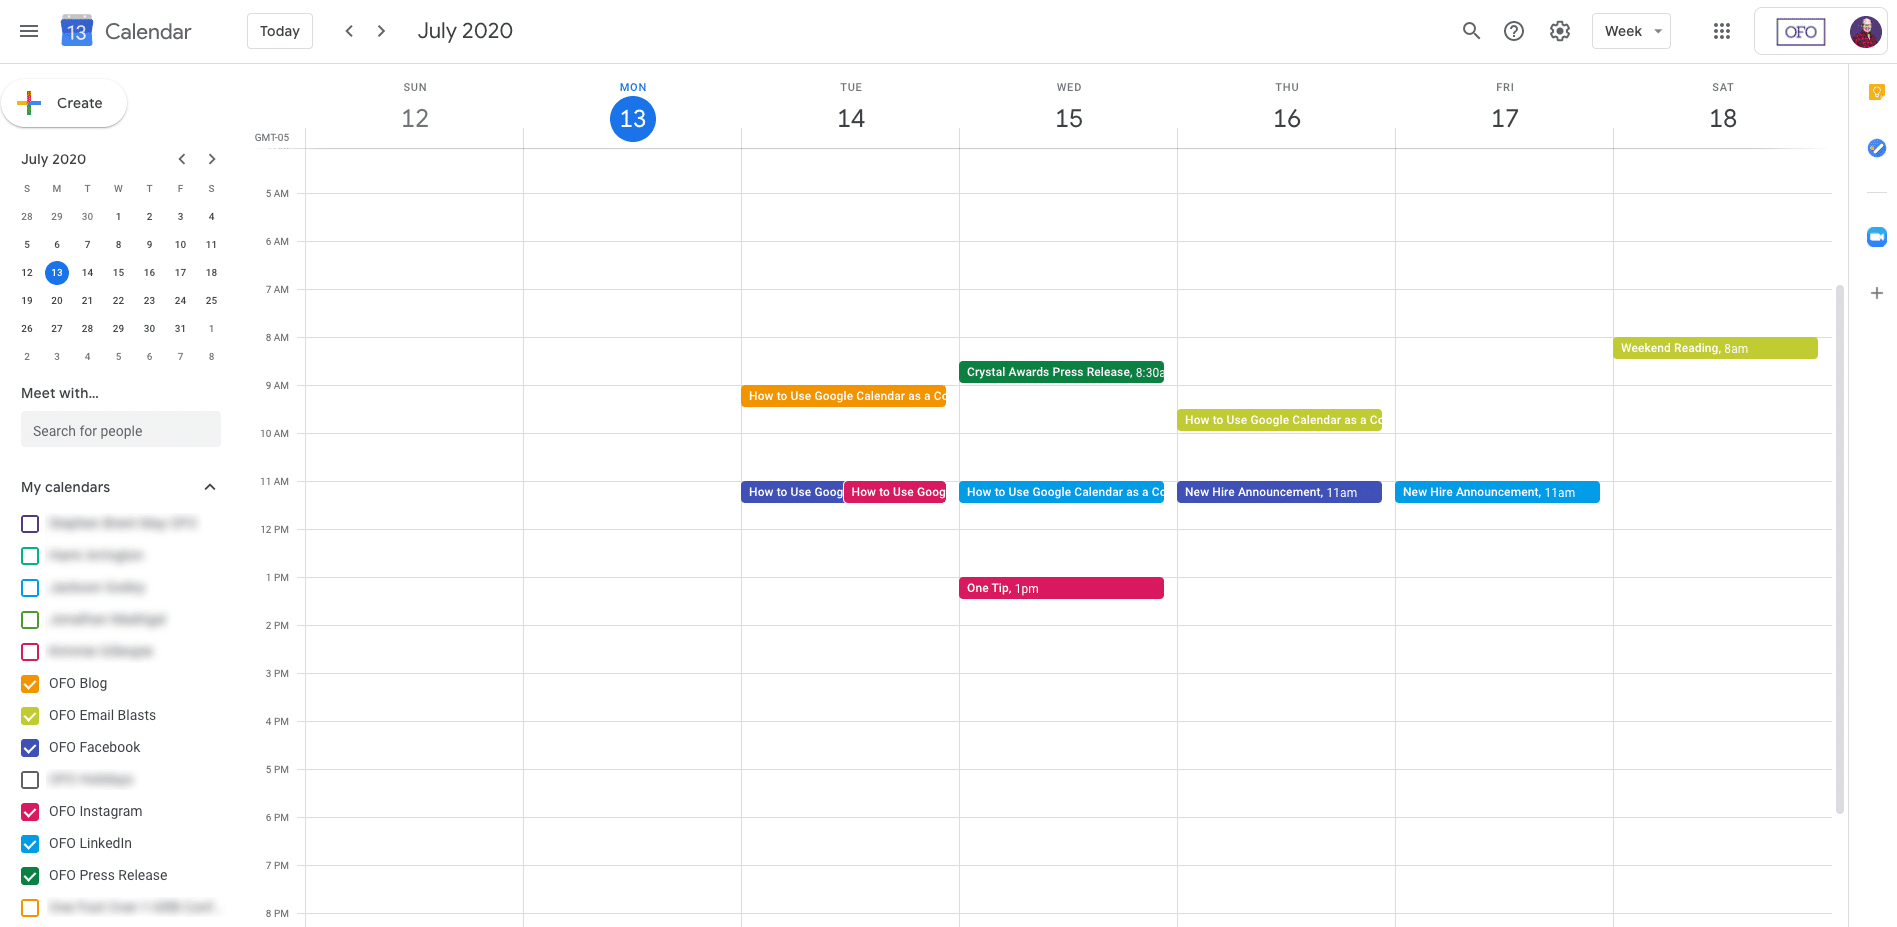 Google Calendar’s monthly view shows the due dates and times for upcoming social media content.